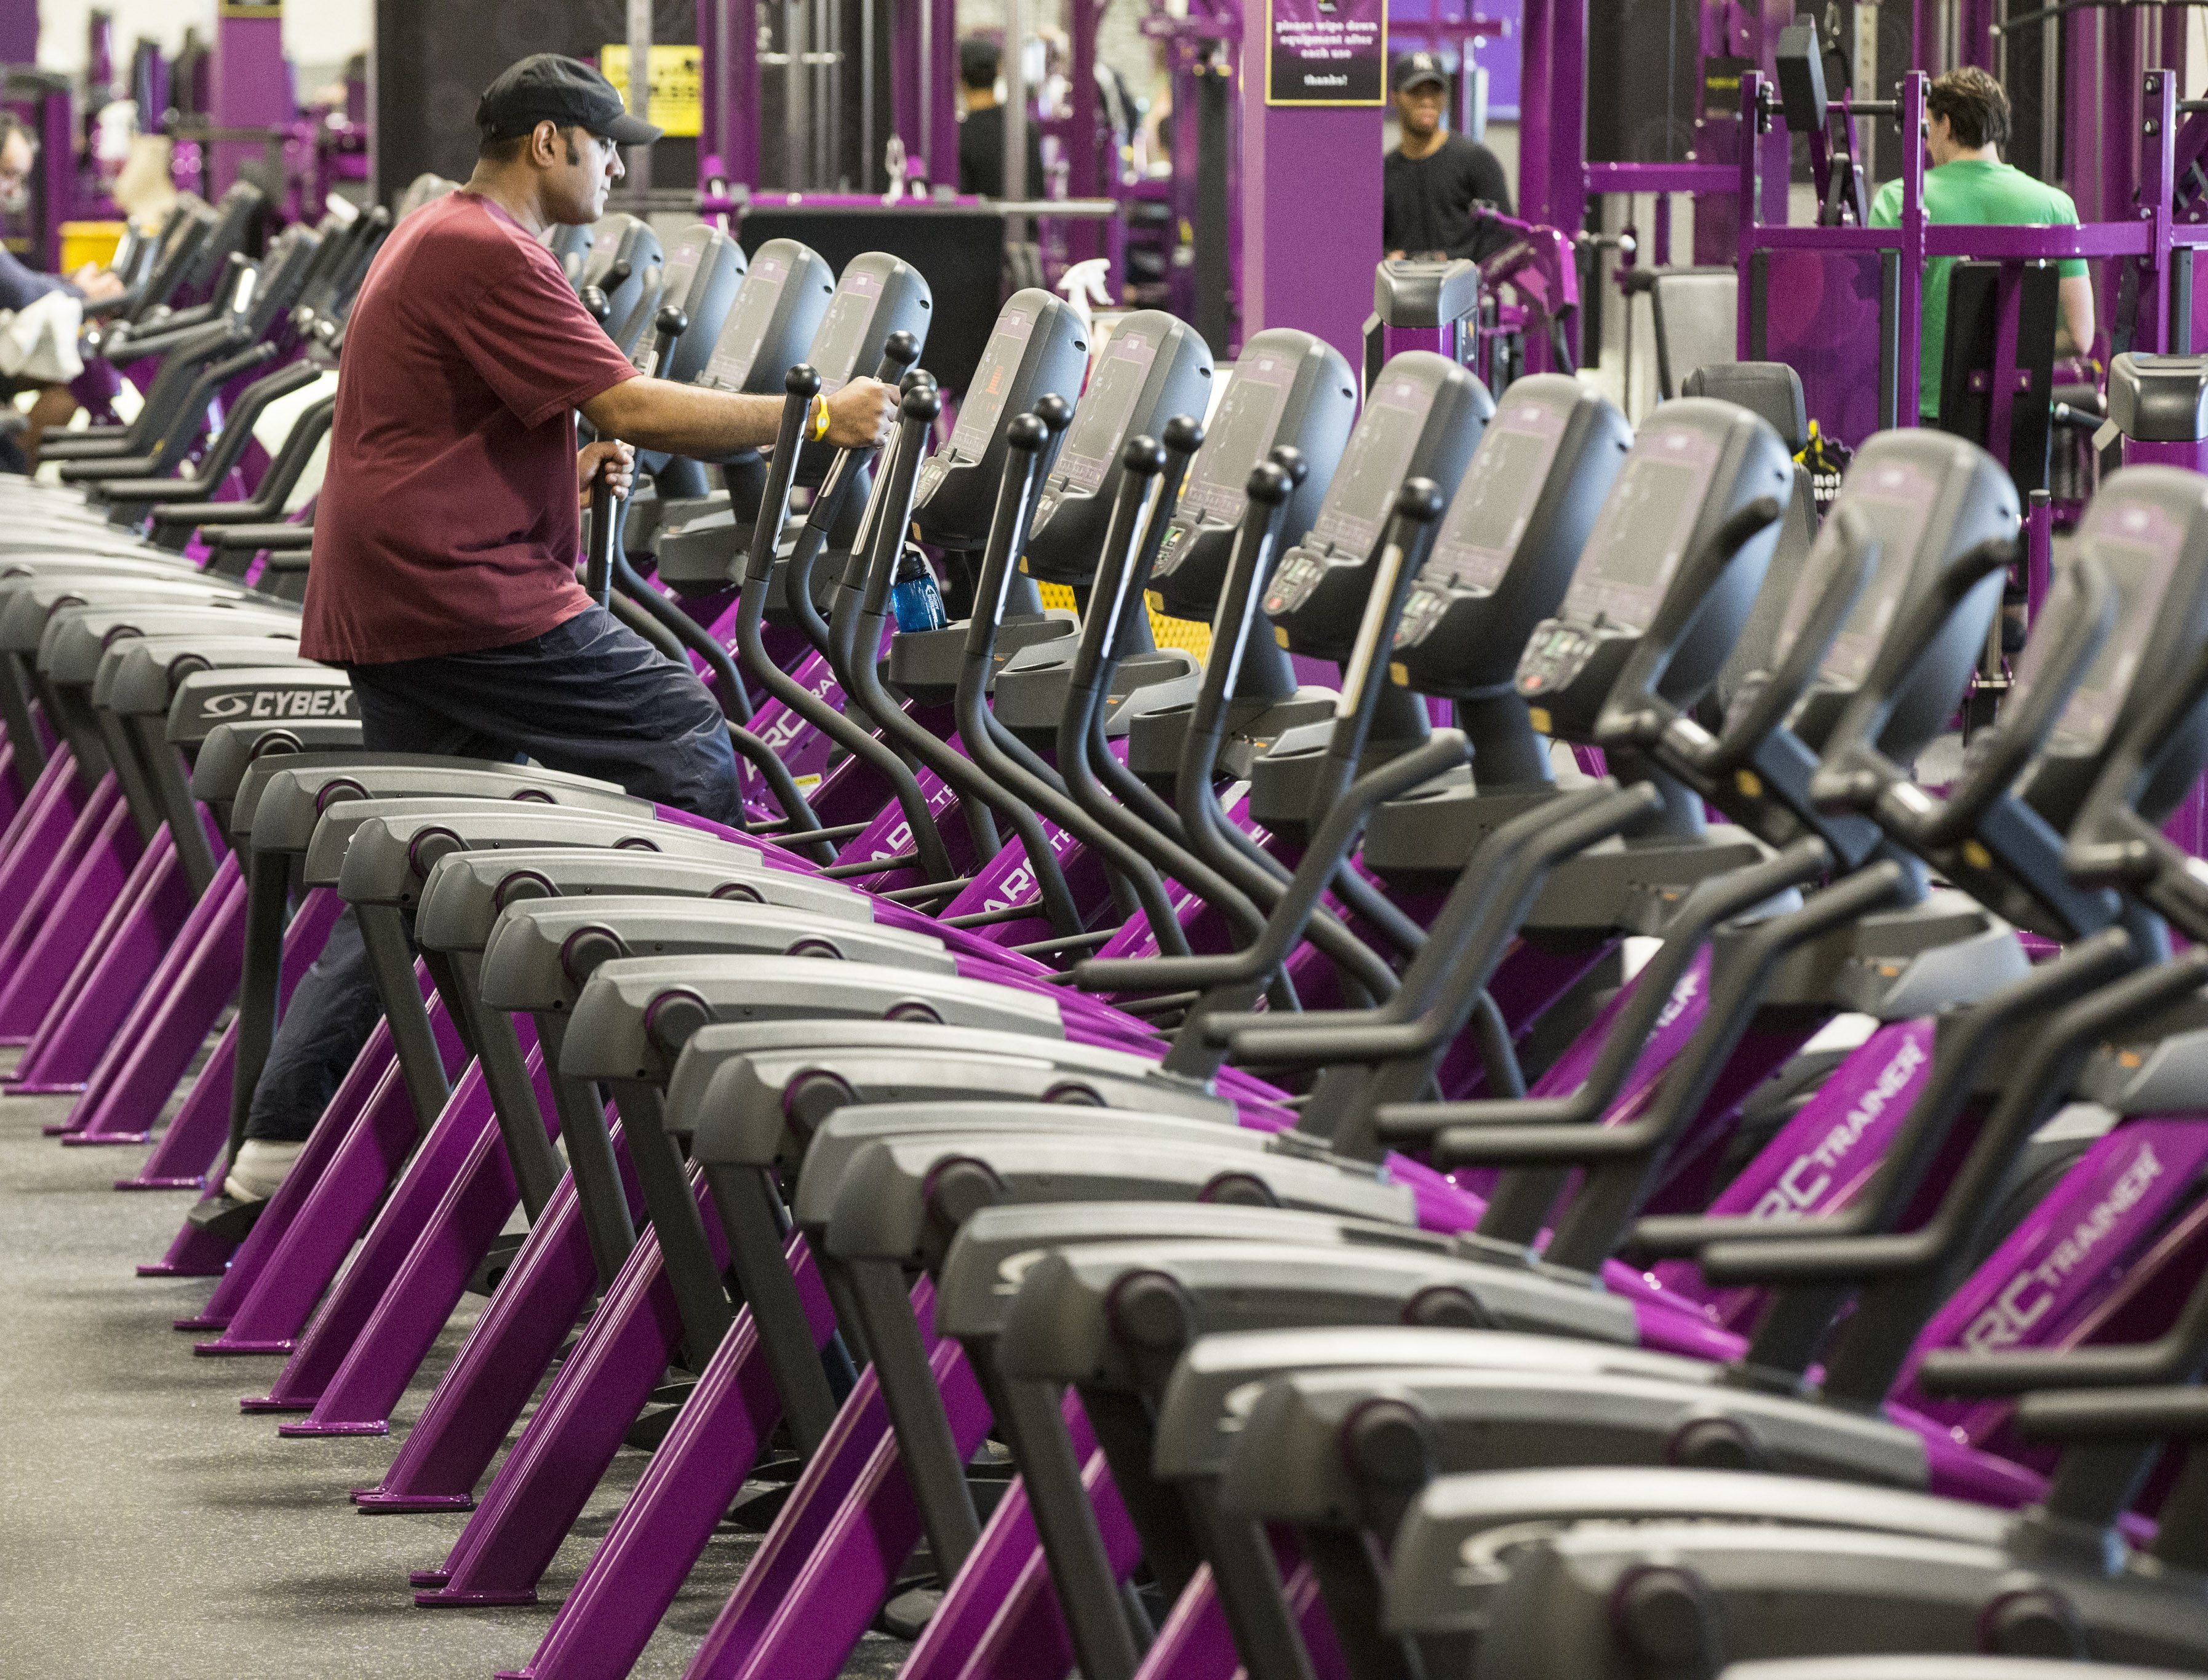 How Much is Planet Fitness Day Pass: Get Fit on the Fly